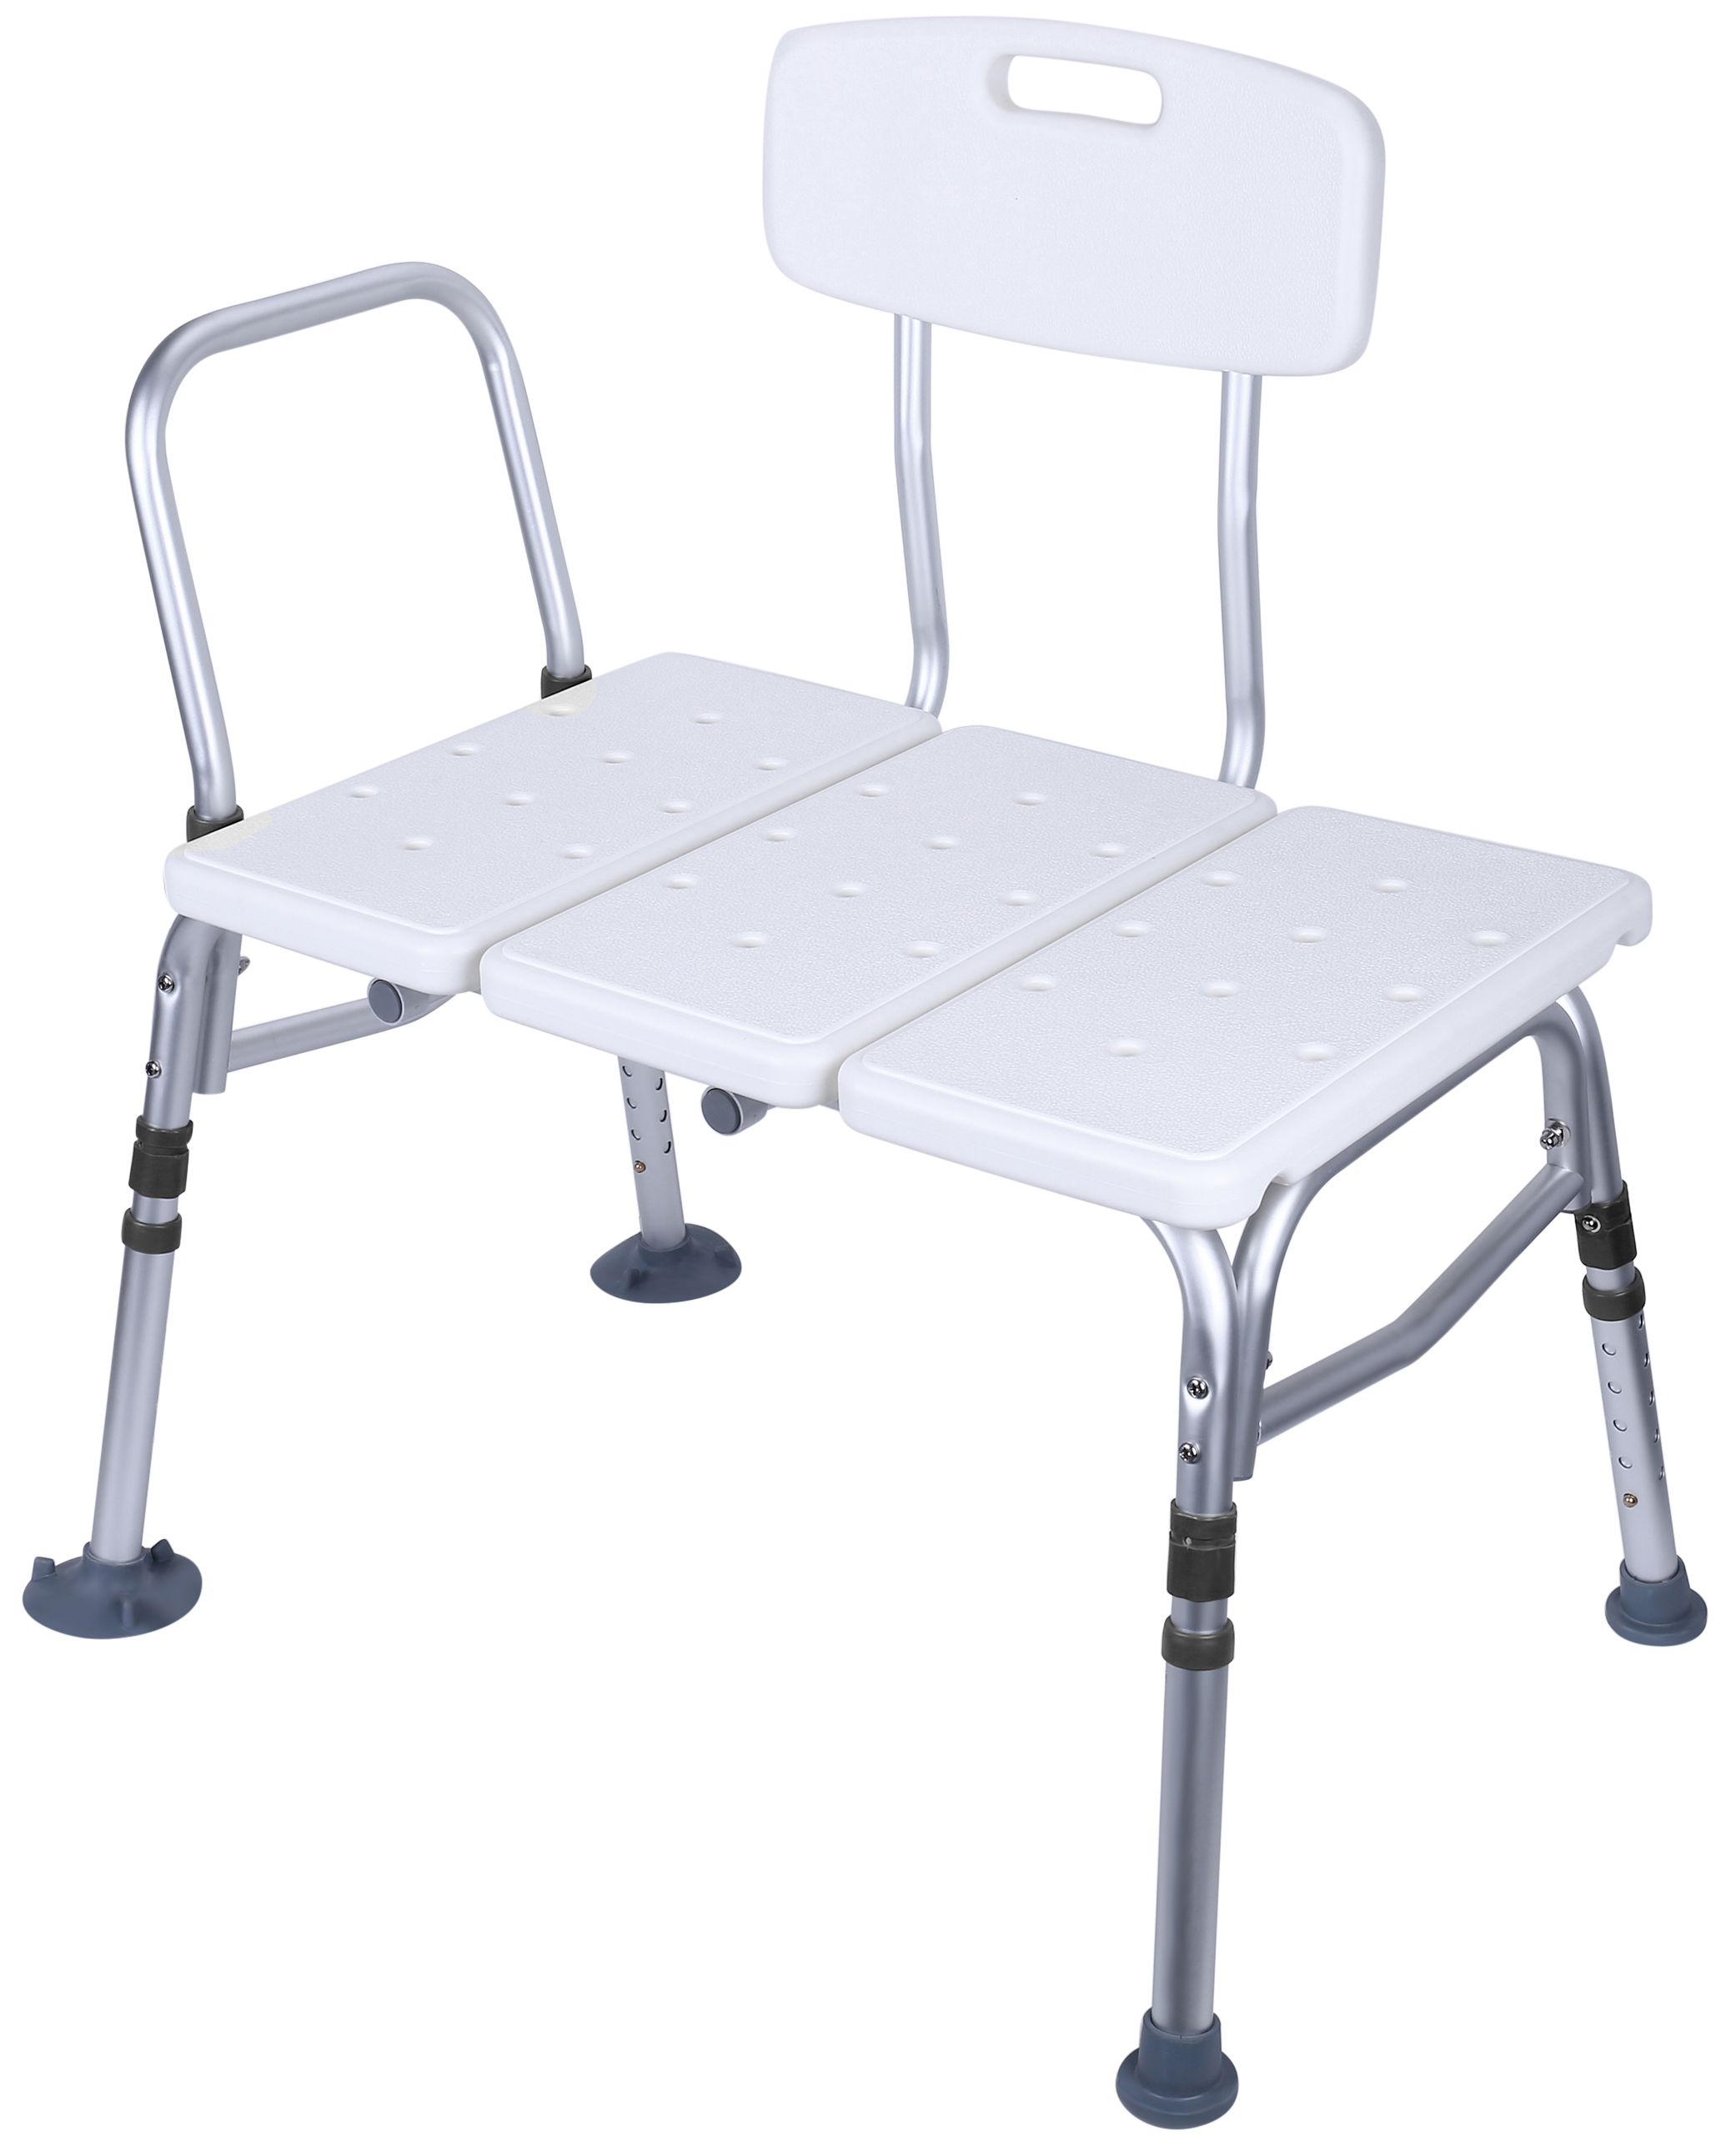 Everyday Essentials Adjustable Height Bath Shower Tub Bench Chair with Adjustable Backrest - image 1 of 5